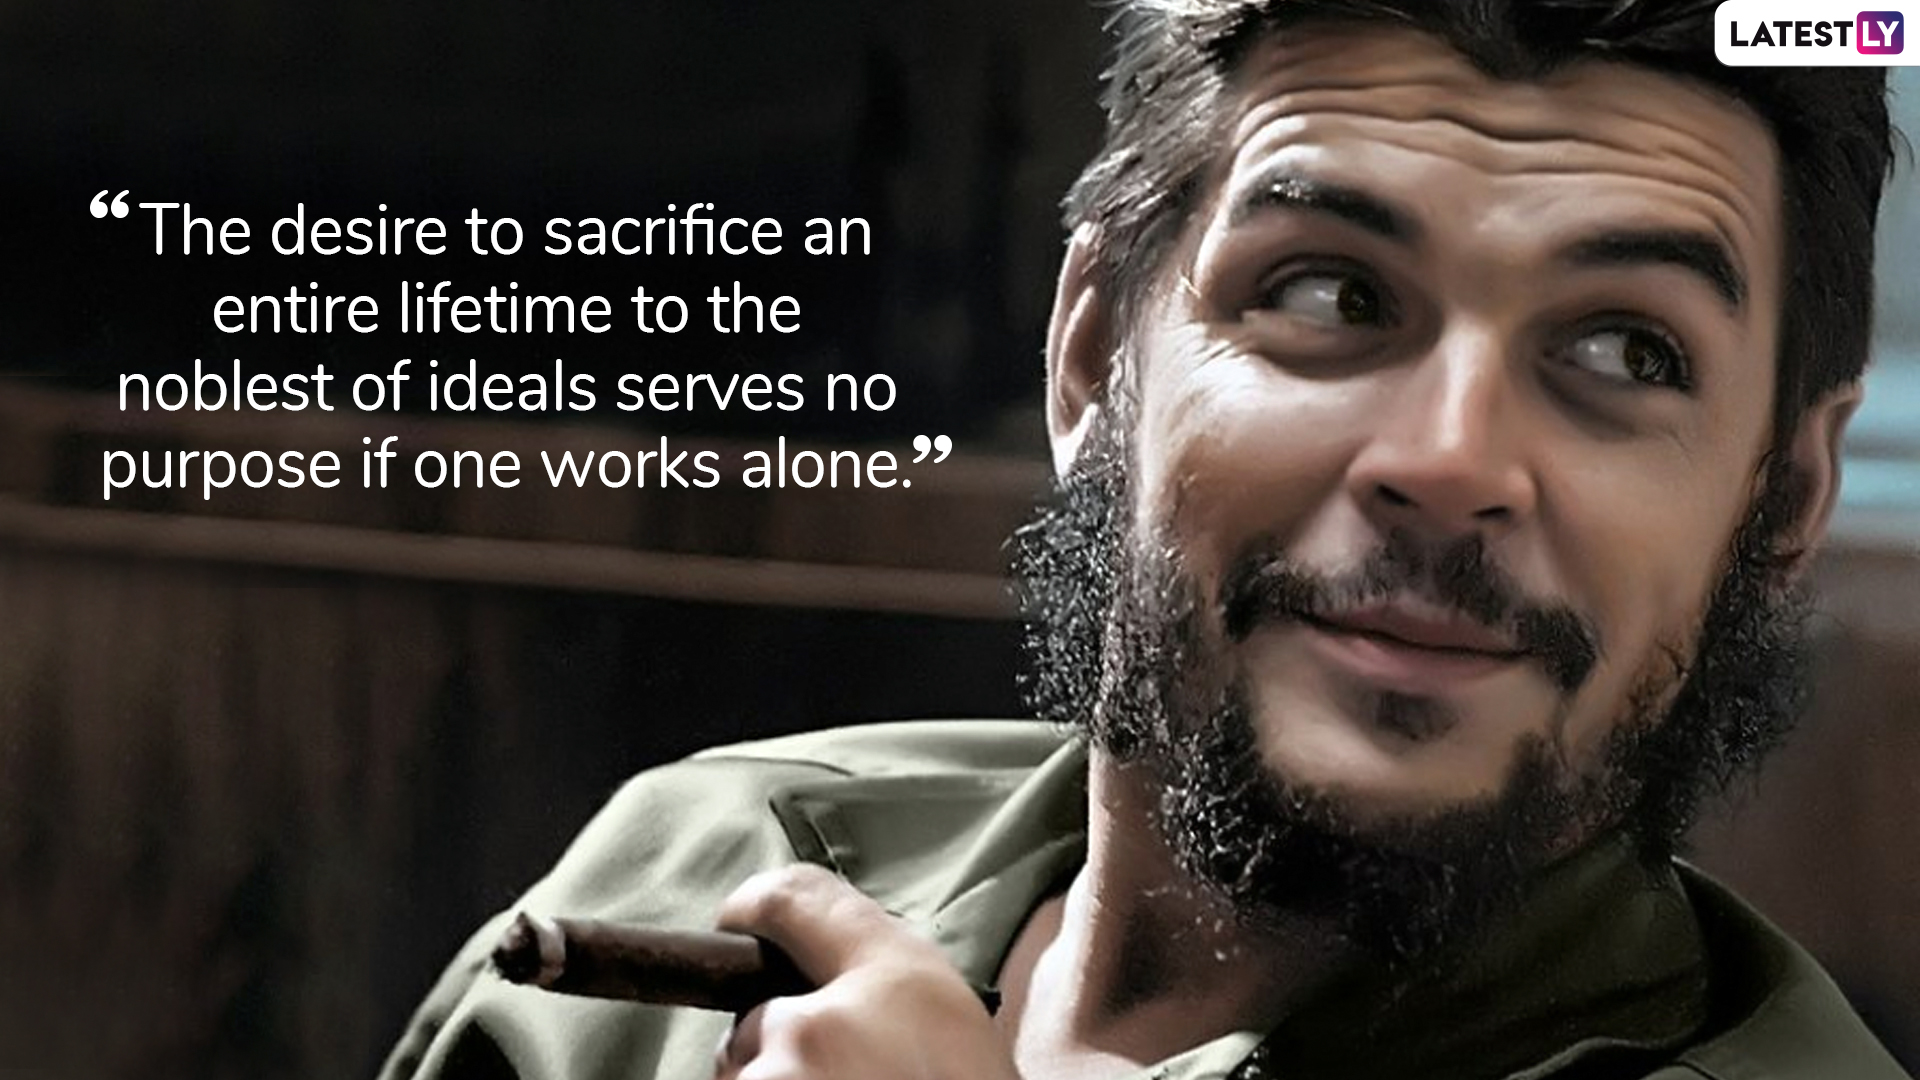 Che Guevara Quotes: Remembering The Marxist Revolutionary Guerrilla Leader  On His 91St Birth Anniversary | 🙏🏻 Latestly